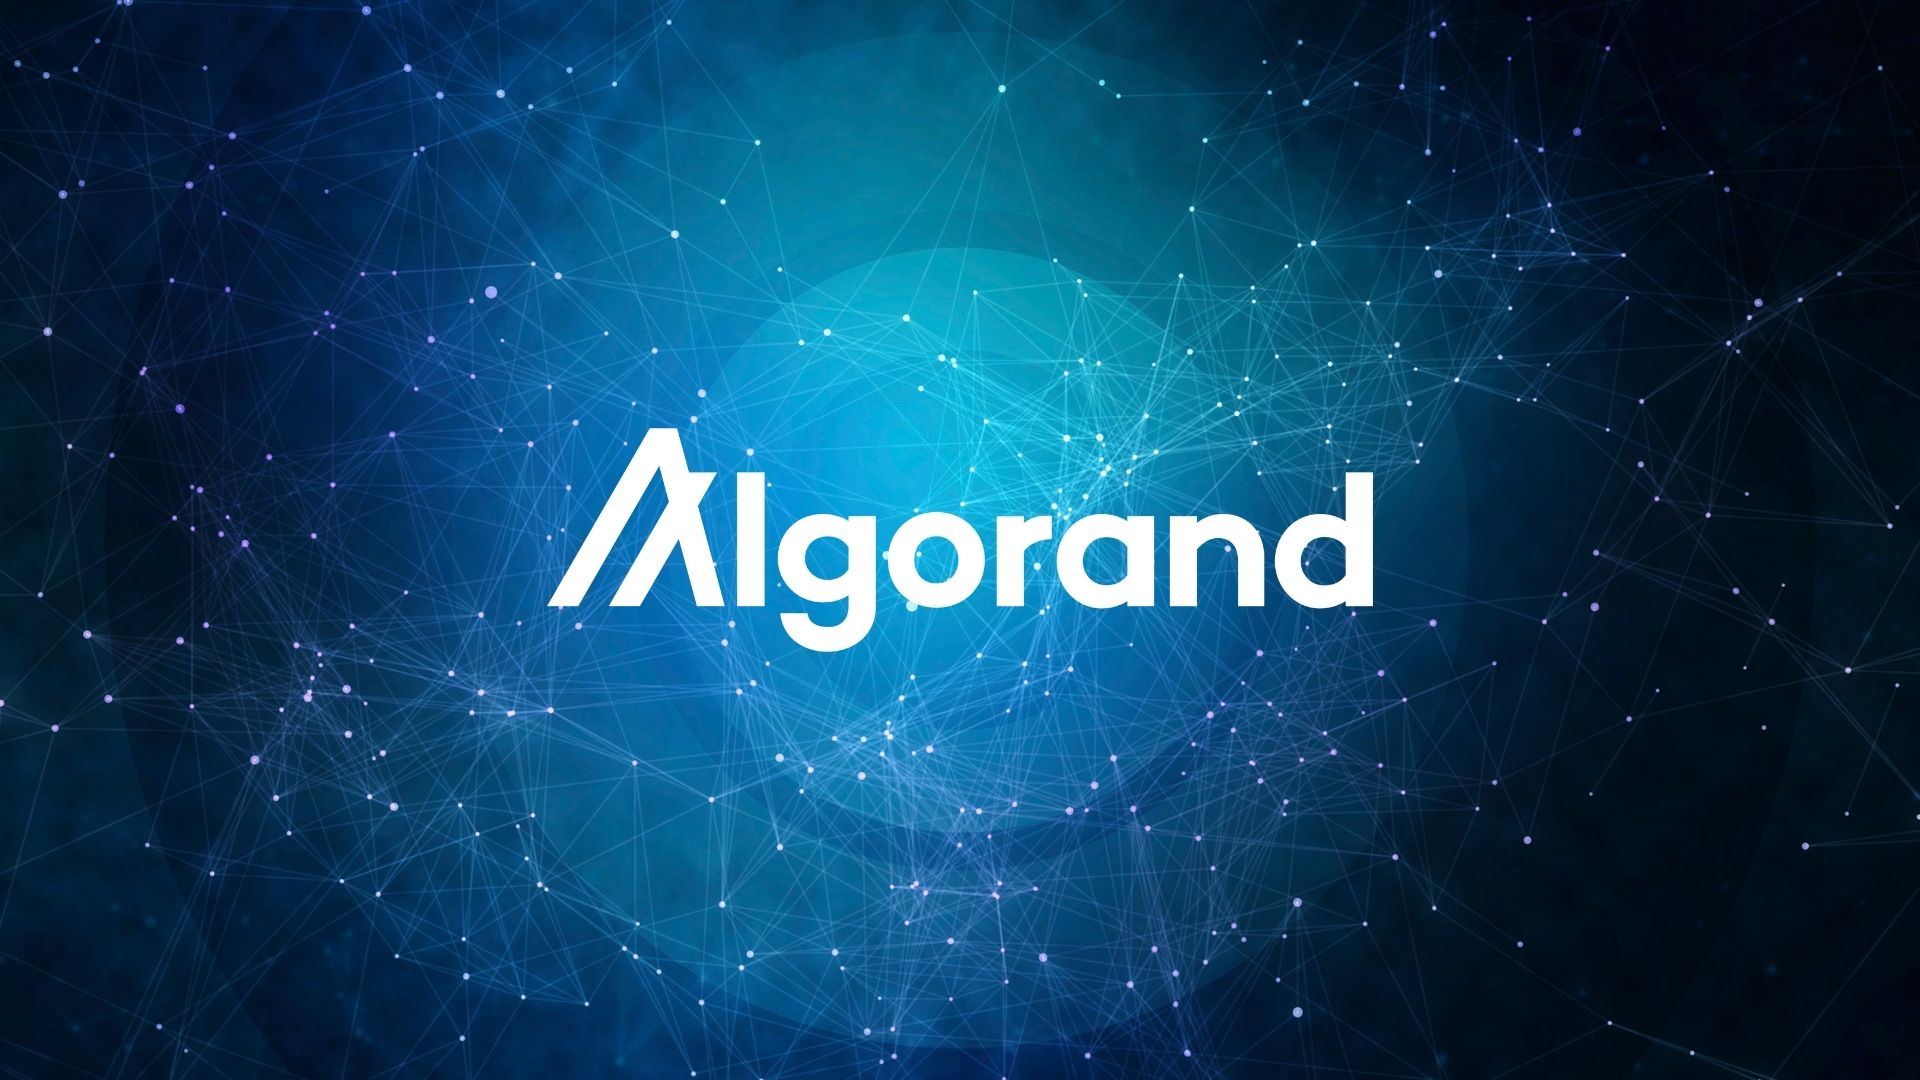 Borderless Capital launches a $ 500 million fund to invest in the Algorand ecosystem (ALGO)